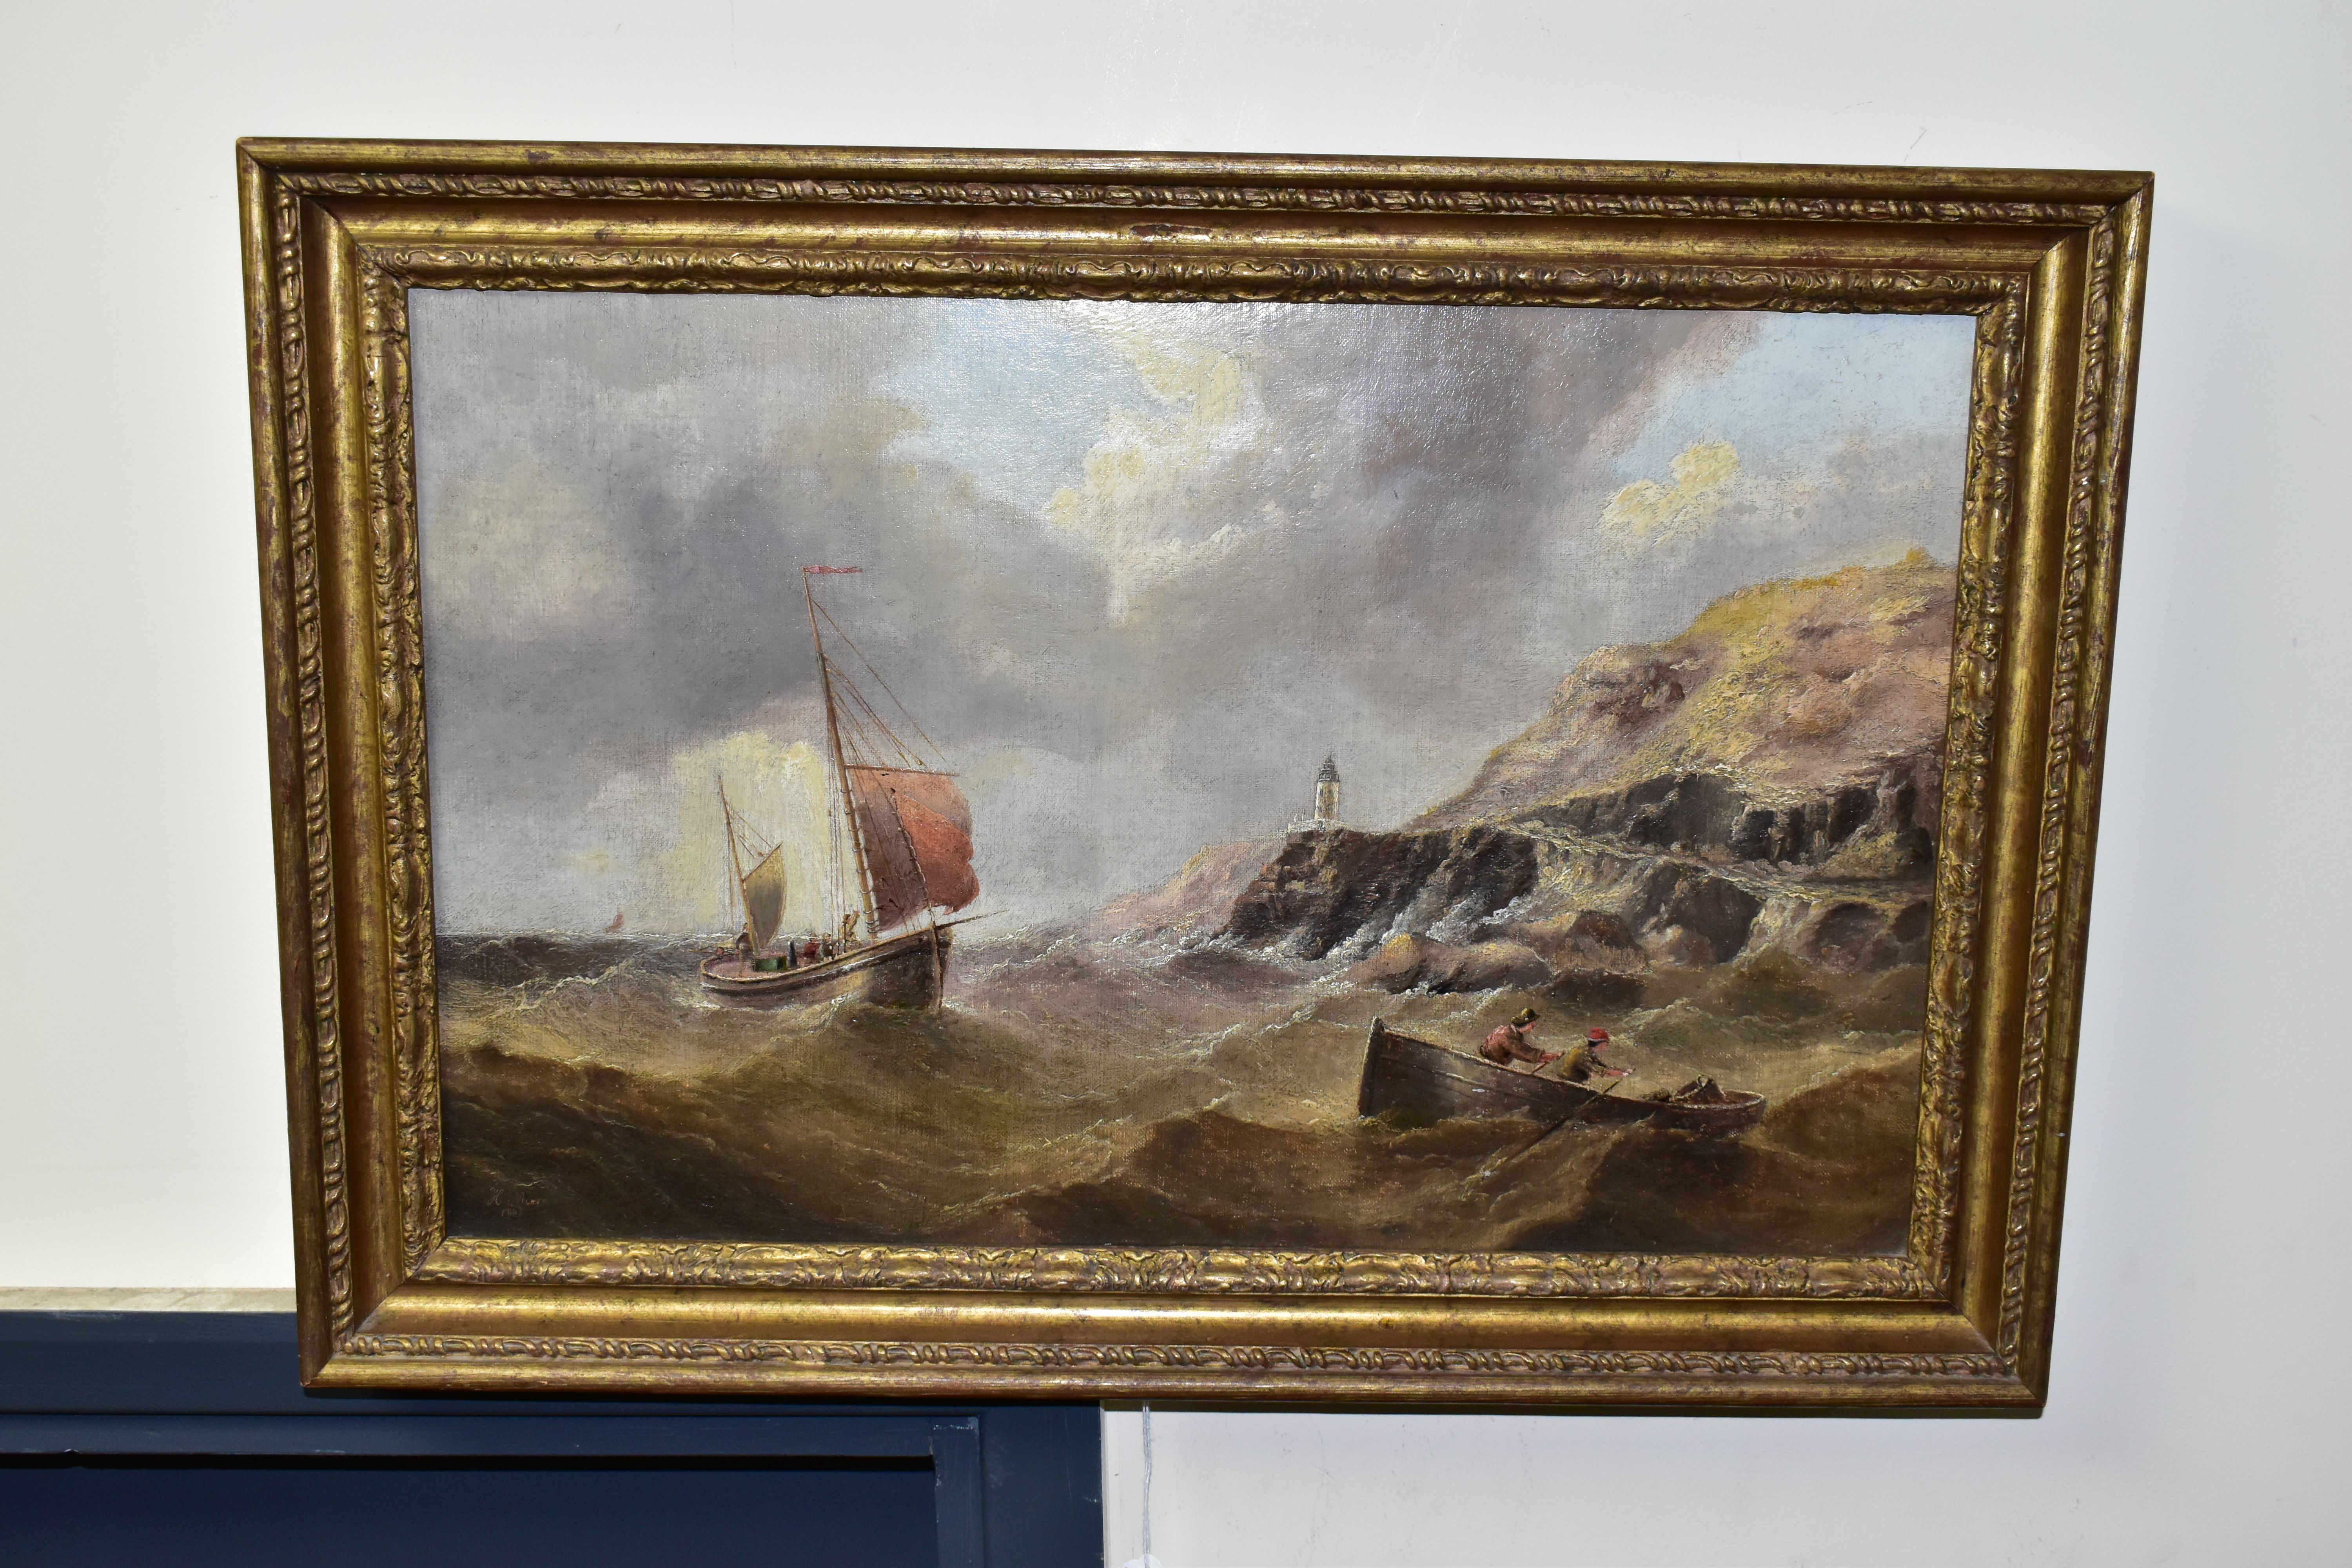 H. MOORE (19TH CENTURY) A FISHING BOAT AND TENDER IN ROUGH SEAS OFF A ROCKY COASTLINE, signed and